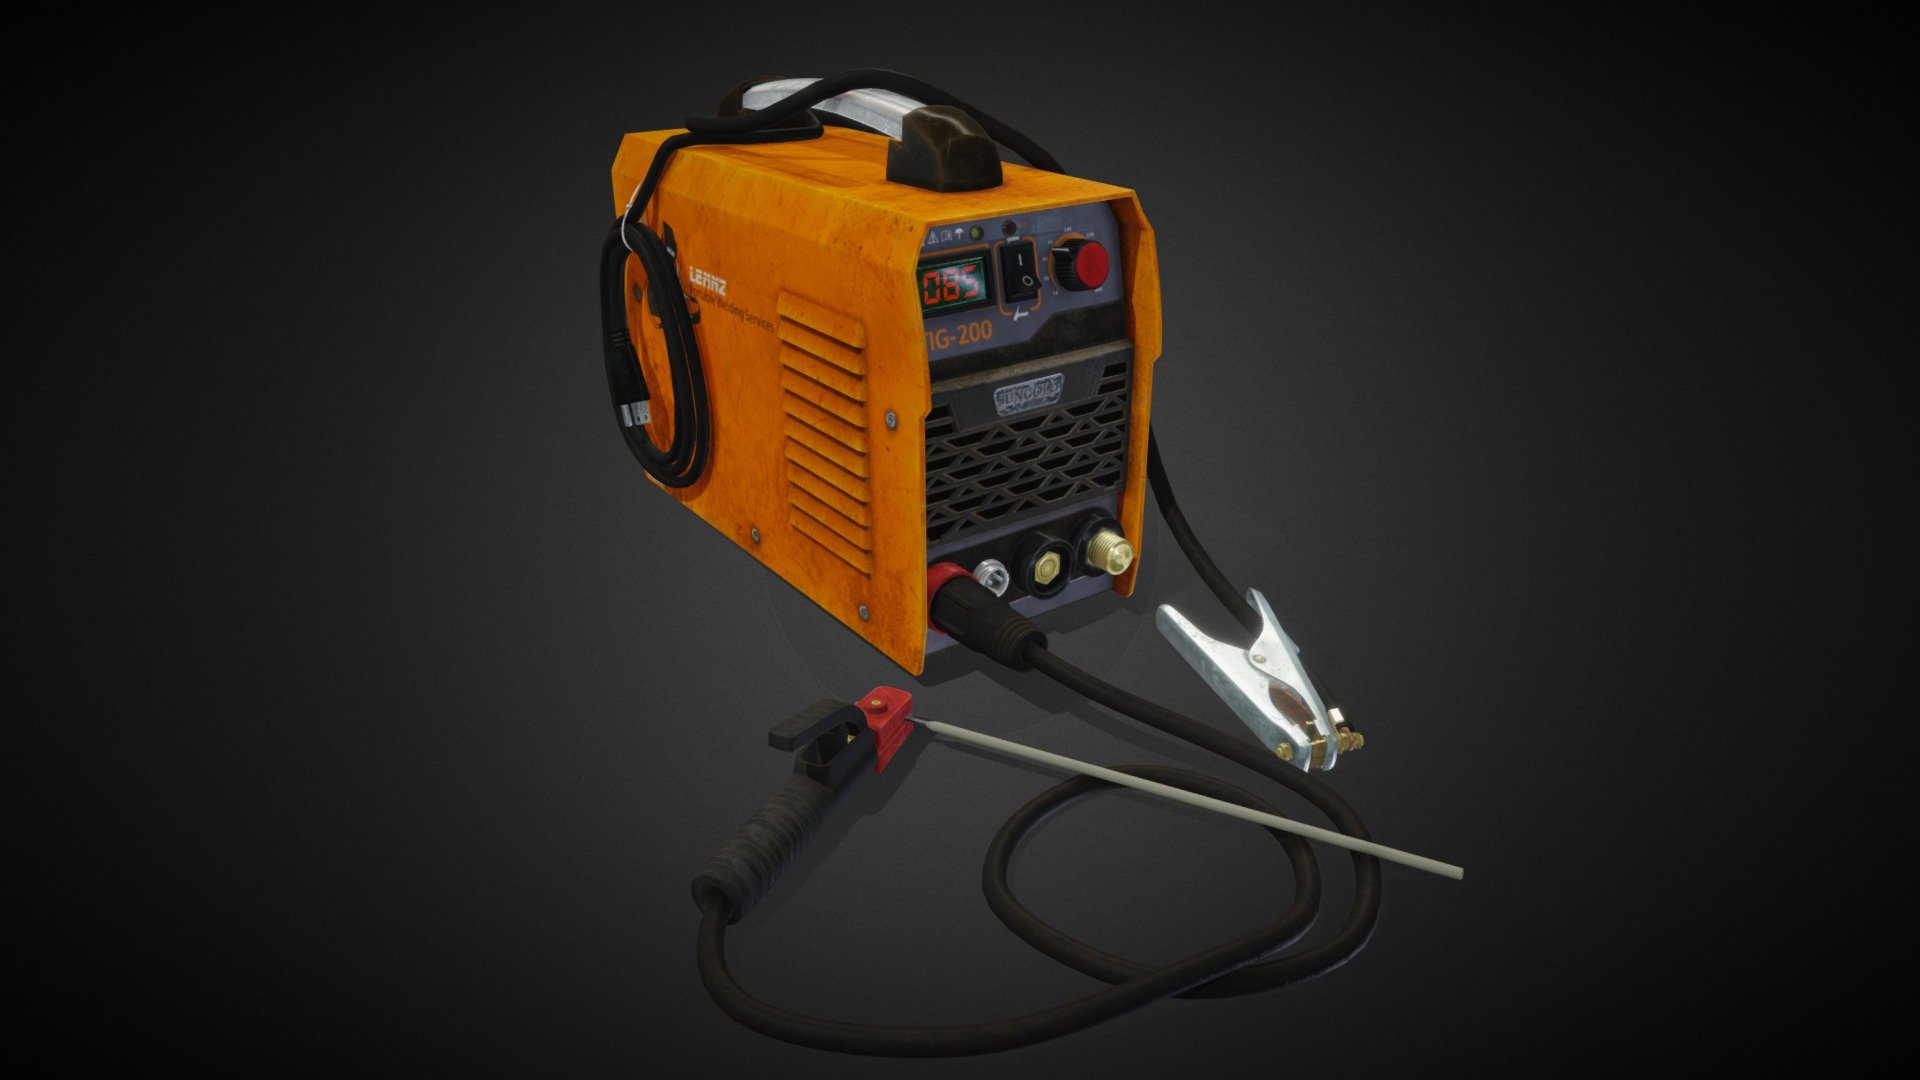 Finally I modeled a welding machine, for this I used 3ds Max, substance 3d painter and marmoset toolbag4 for the bakes 3d model